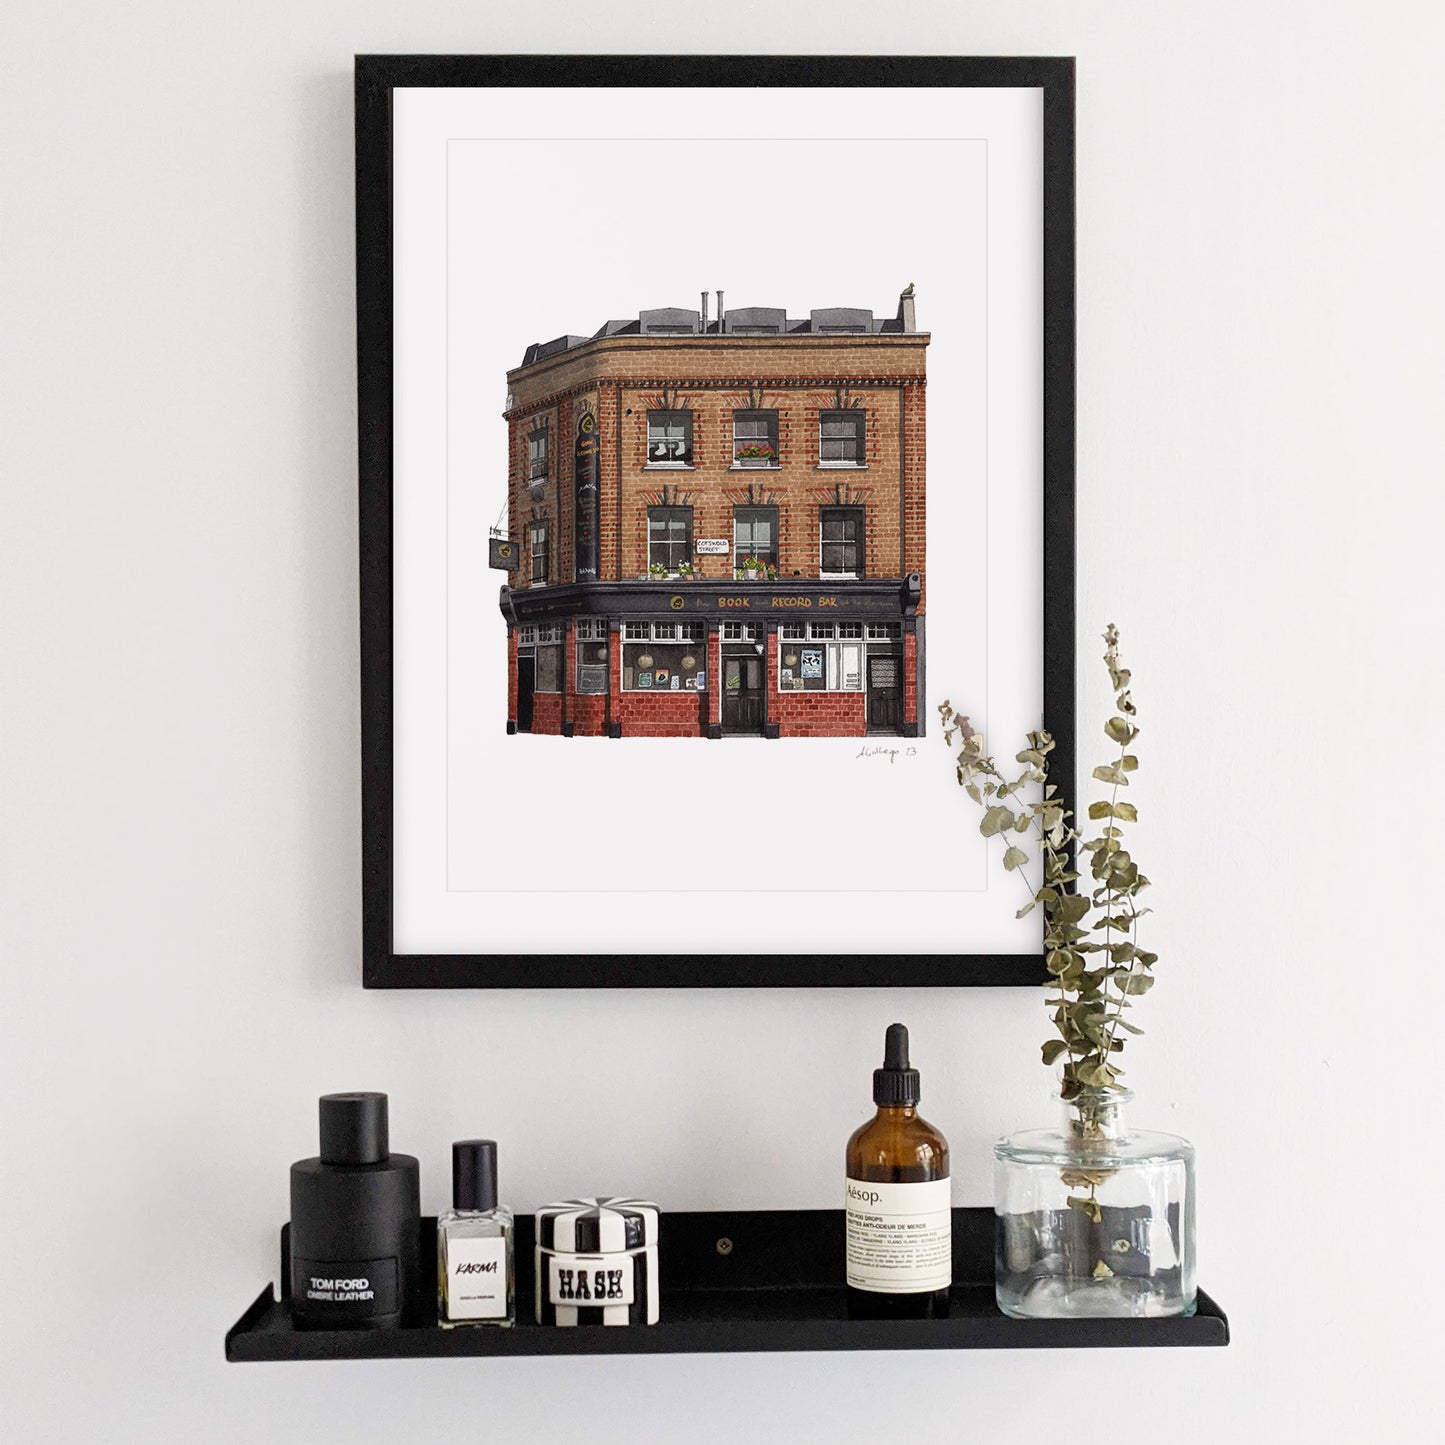 West Norwood - Book and Record Bar - Giclée Print (unframed)